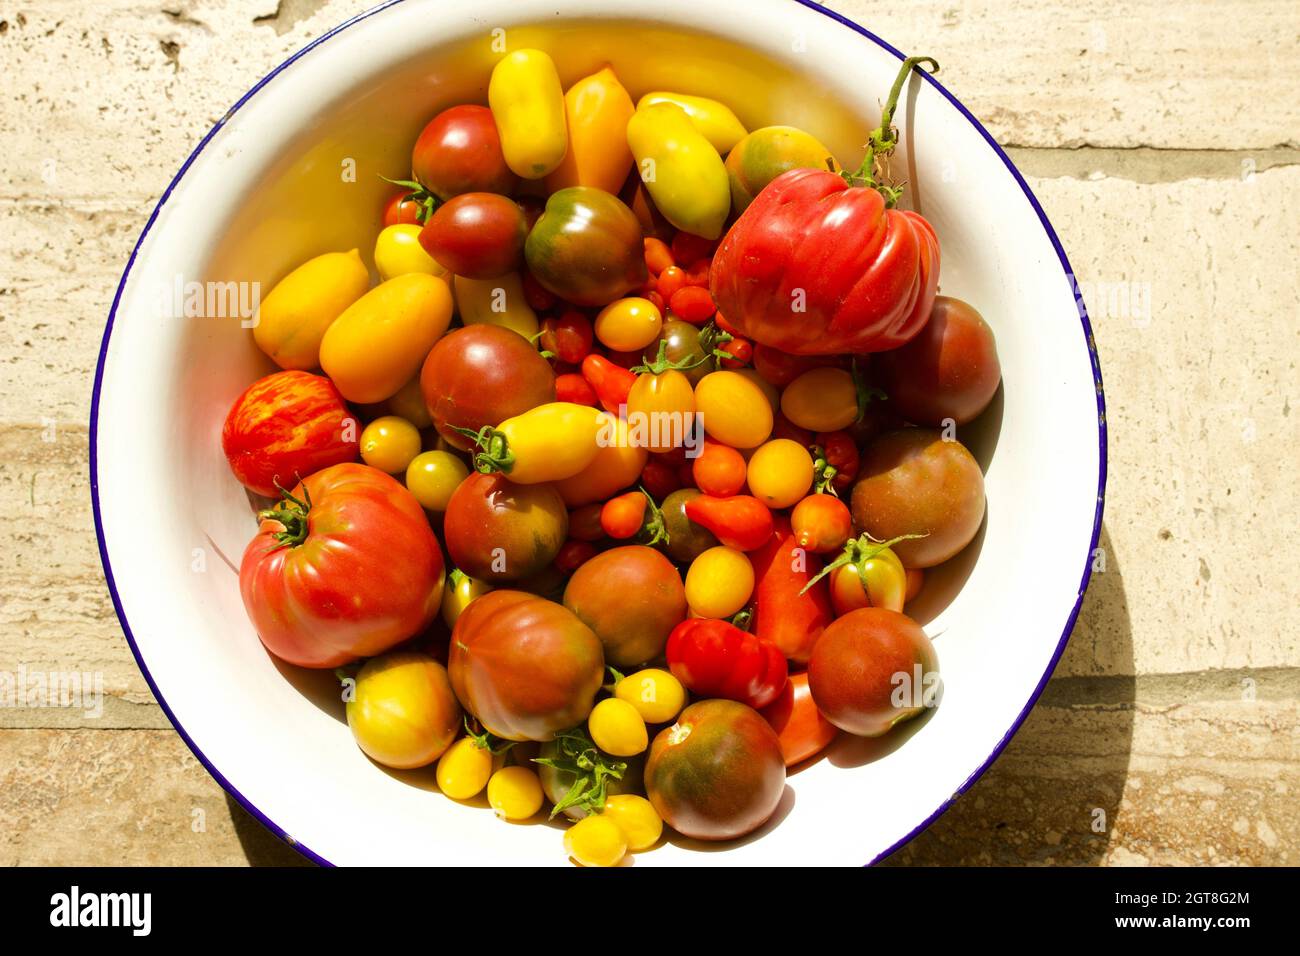 High Angle View Of Mixet Tomatos In Bowl On Sotne Stock Photo